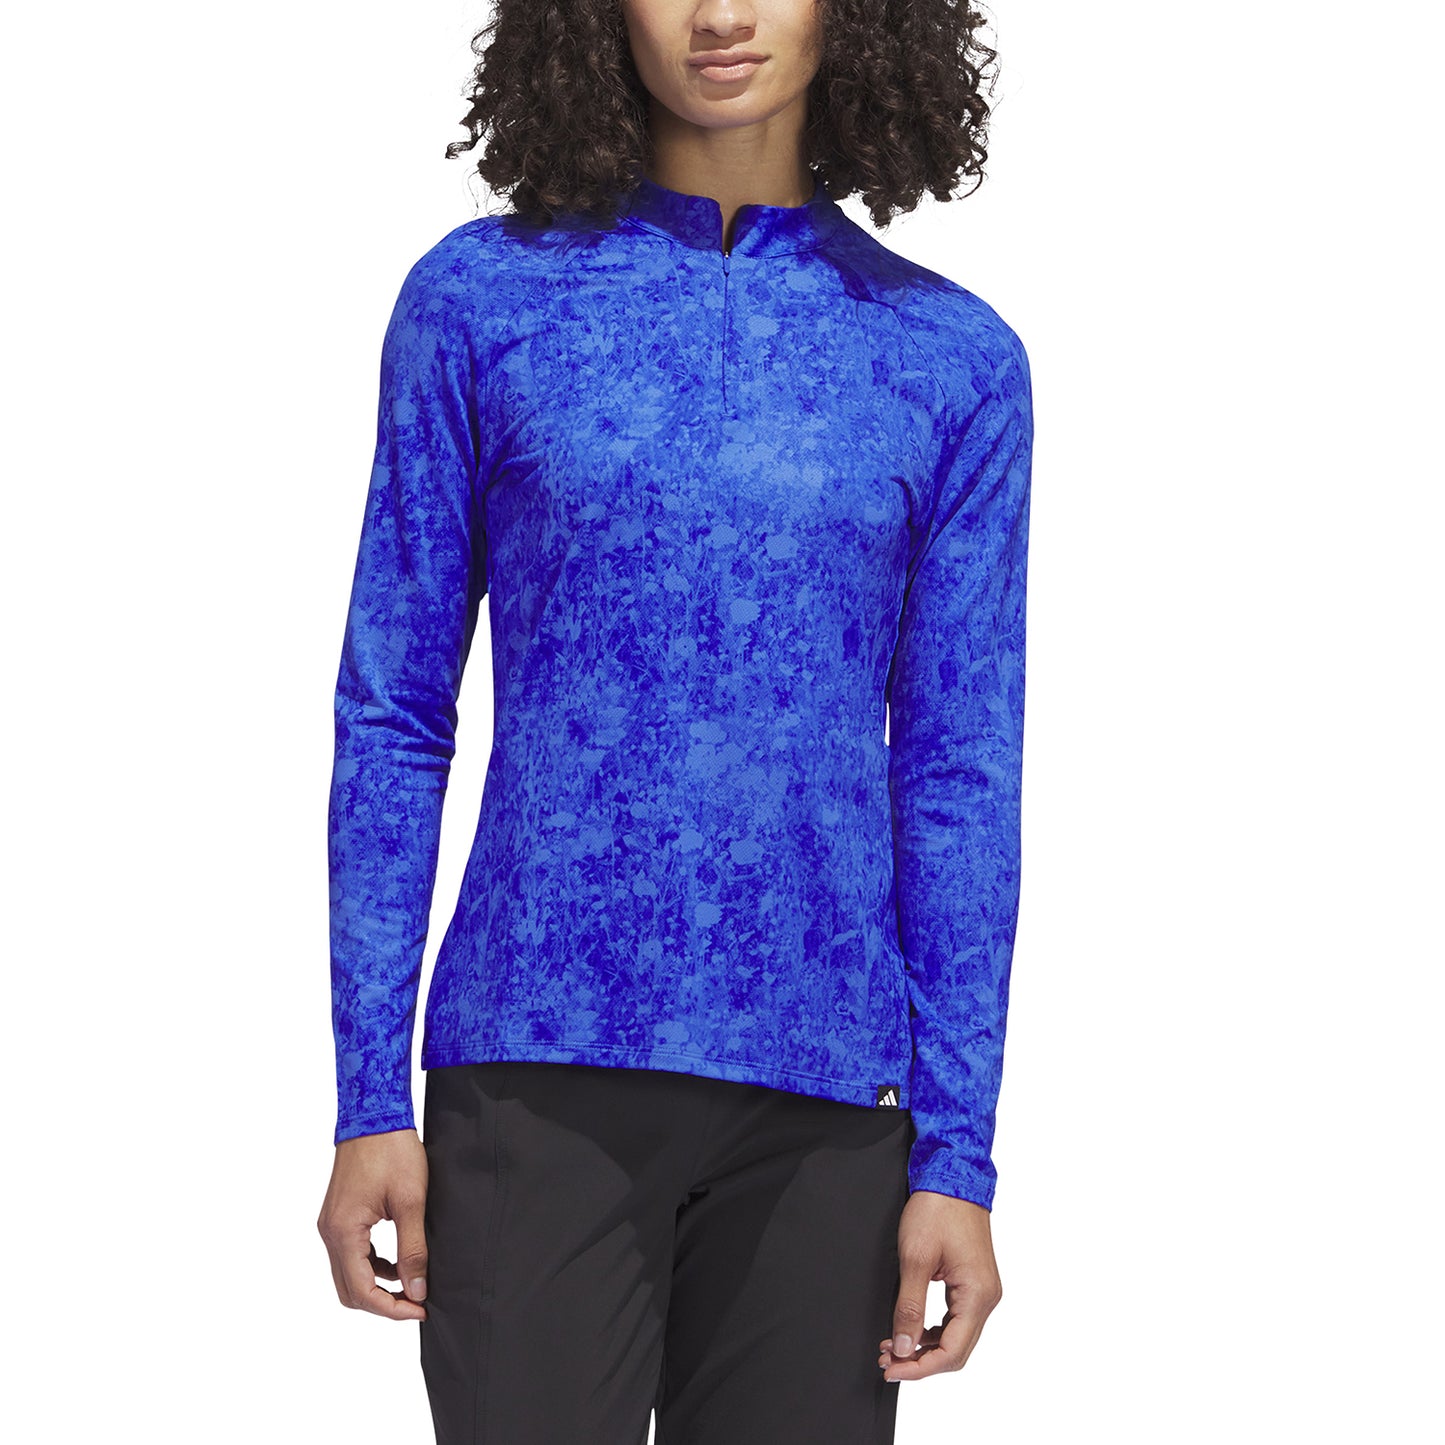 adidas Ladies Long Sleeve Zip Neck Golf Top with Abstract Print - Medium Only Left